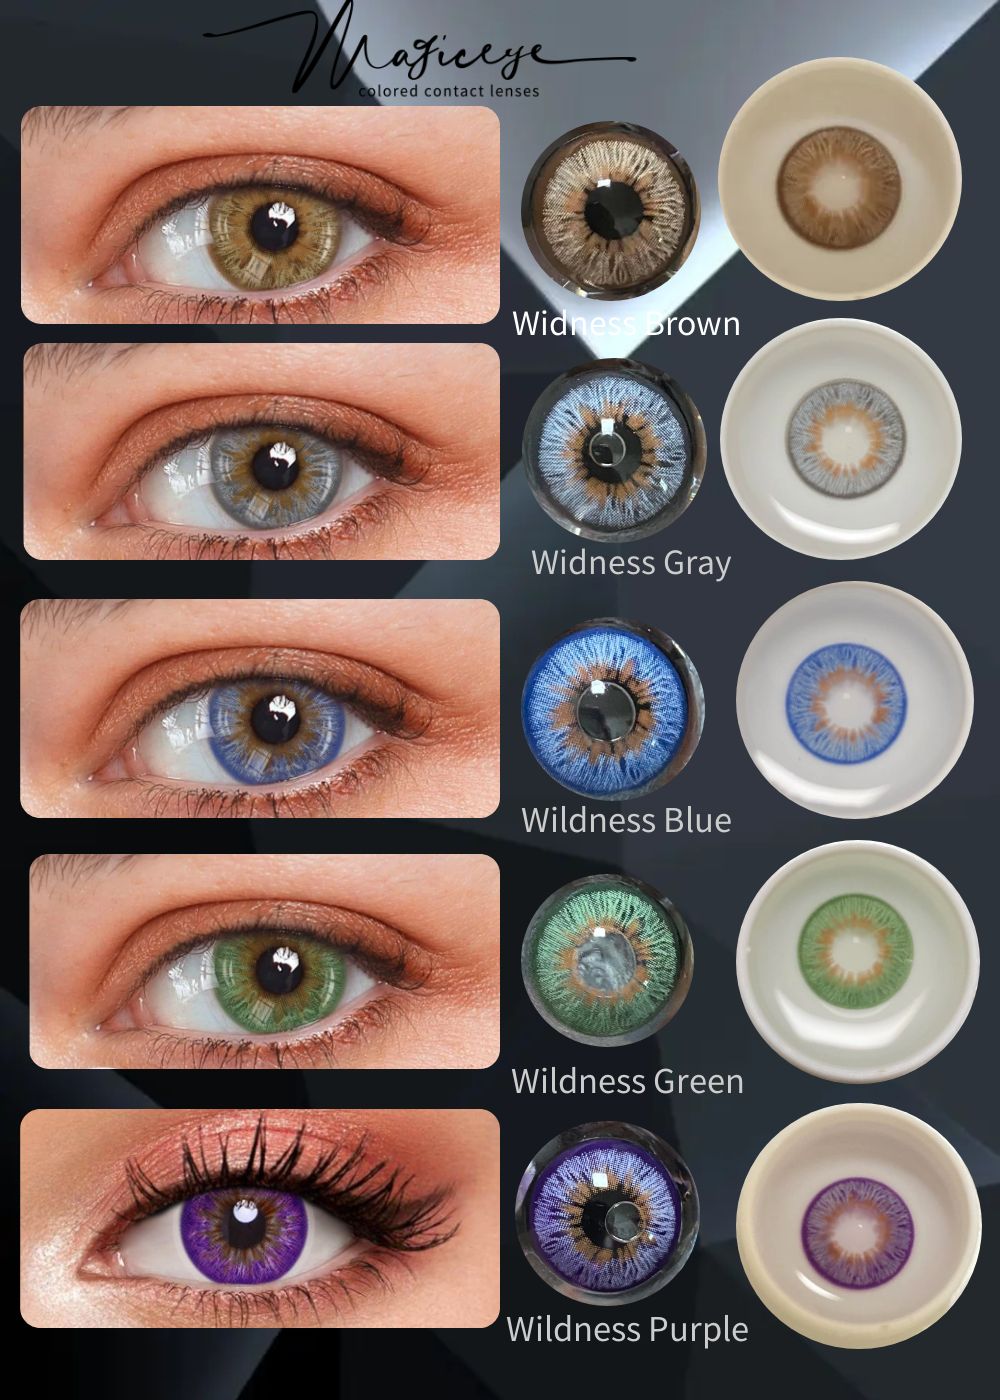 Wildness Leopard Brown Color Contact Lenses